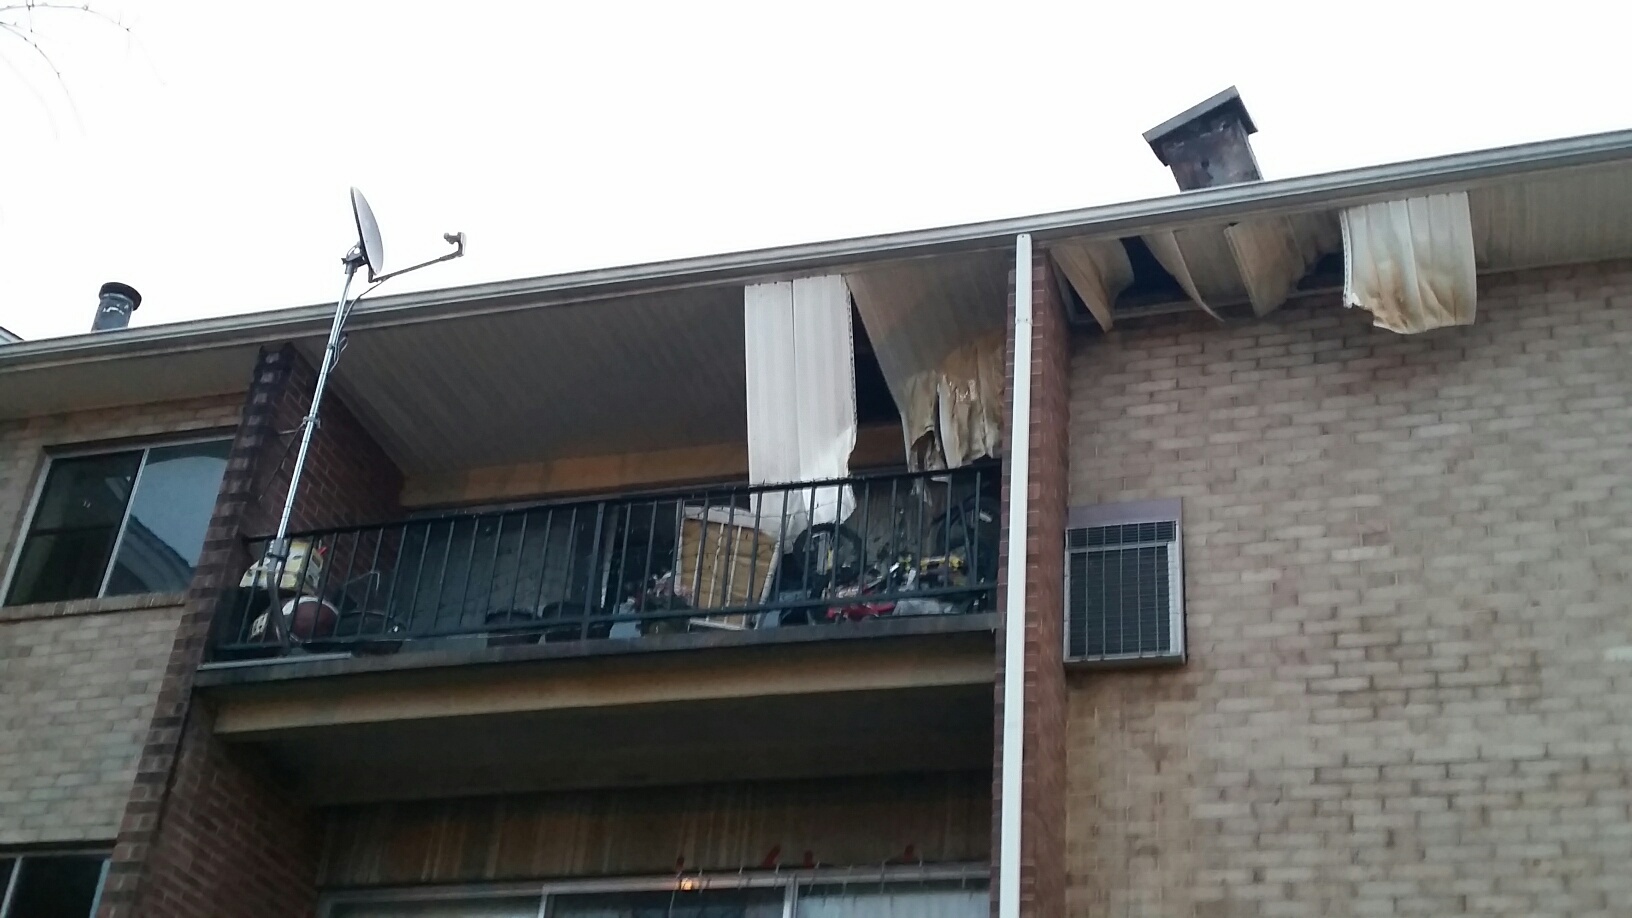 Firefighters were called to an apartment complex in Alexandria Saturday around 6 p.m. (WTOP/Kathy Stewart)